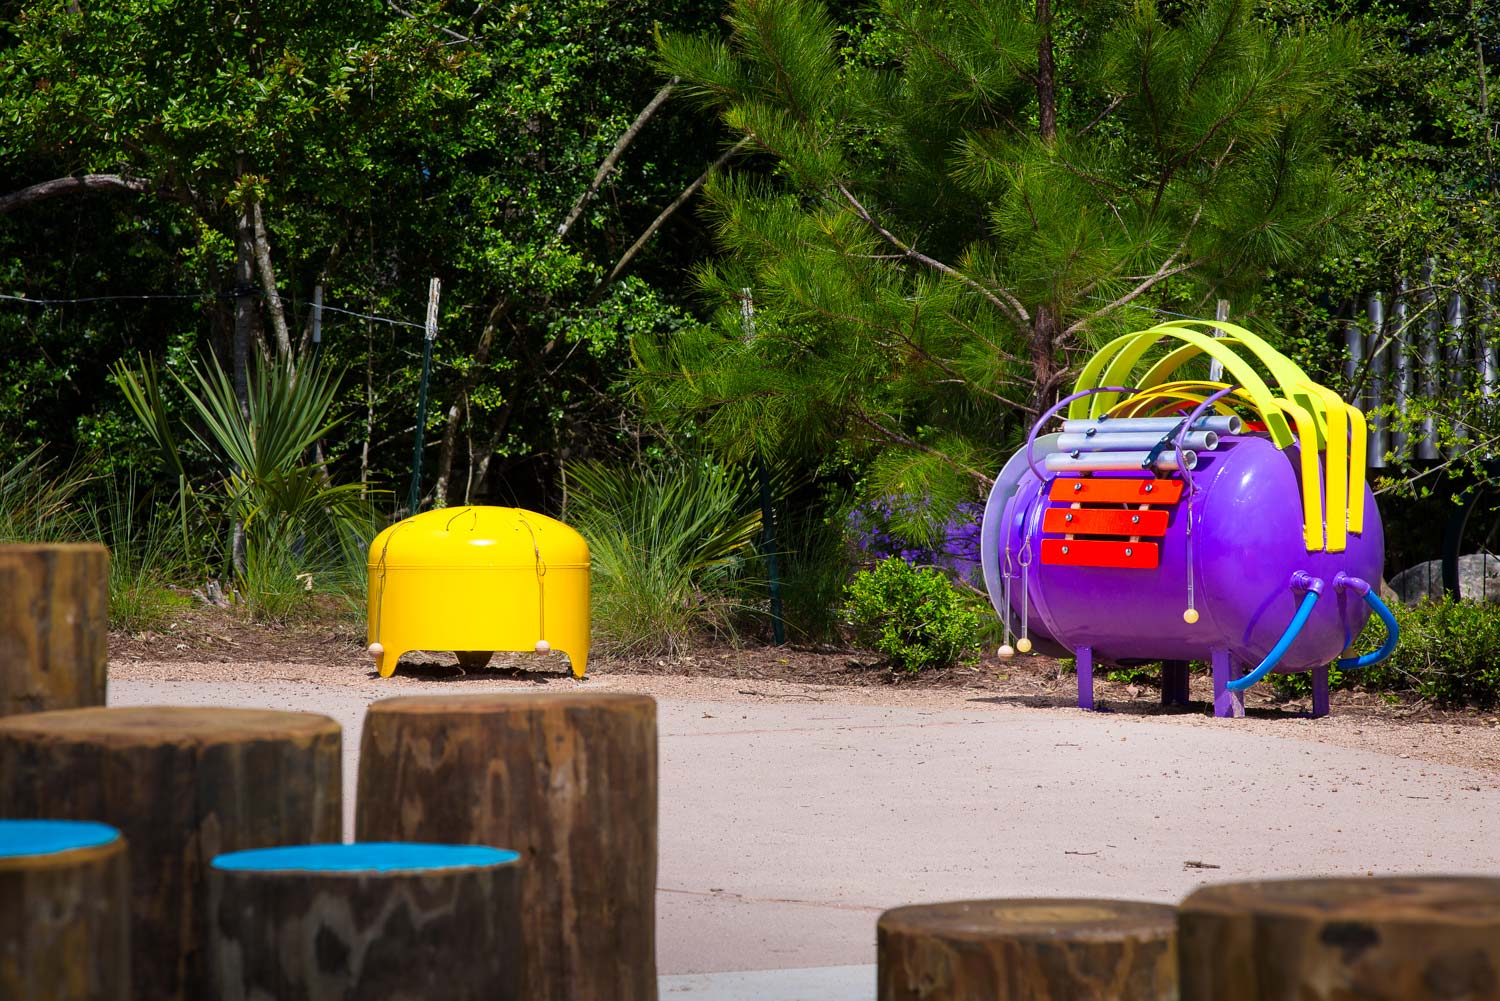 Along our trails, residents will find musical elements such as wind chimes, chimes in the shape of a chime-asaurus, Grandioso Chimes and whale drums.